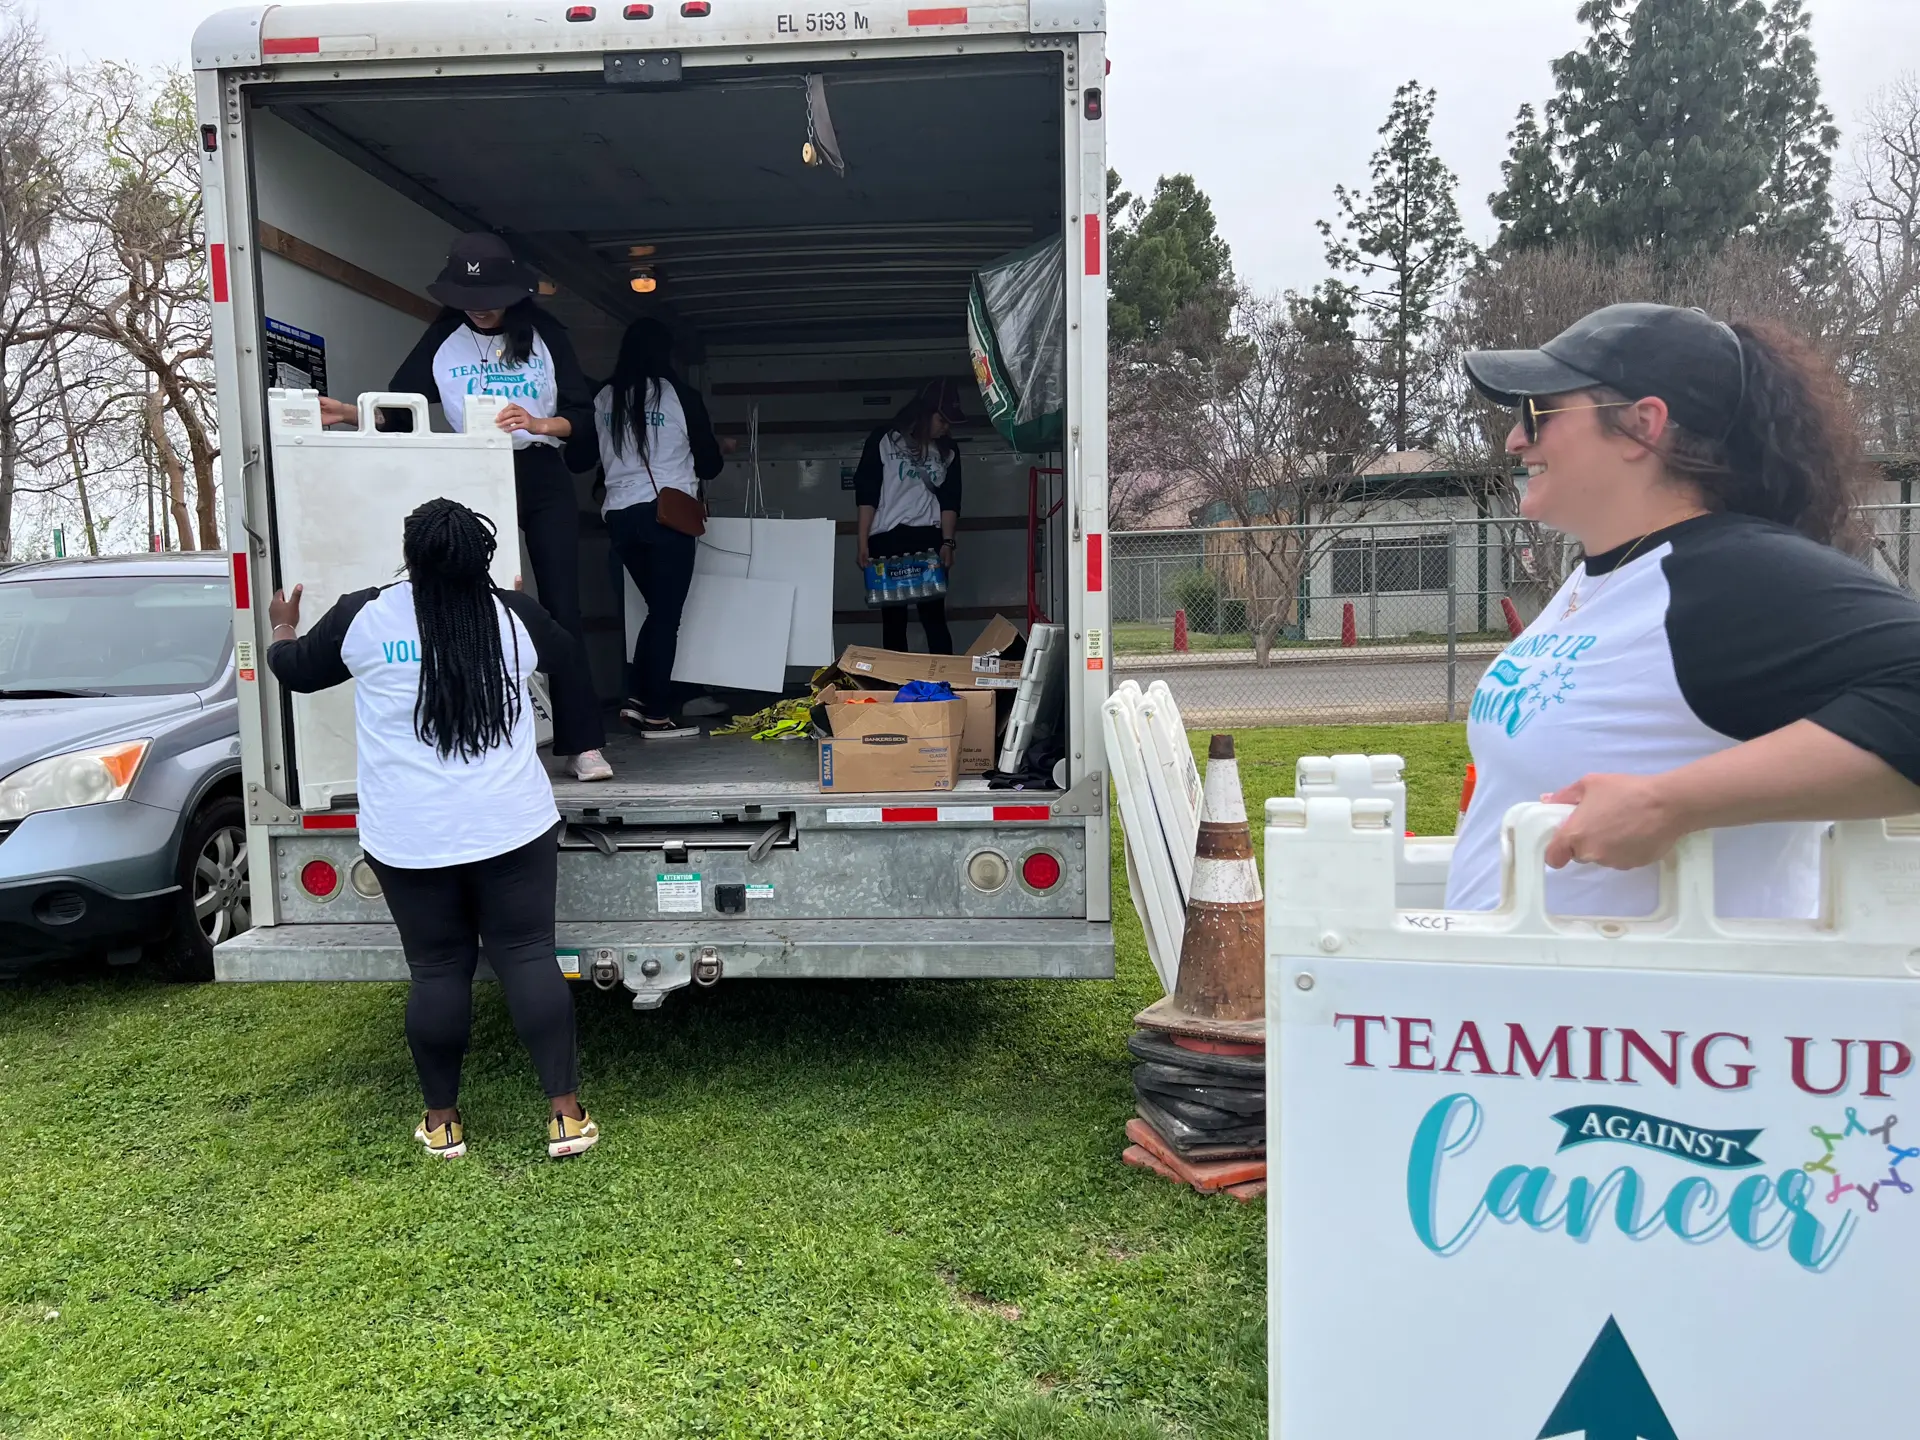 Teaming Up Against Cancer volunteers unloading signage from a moving truck